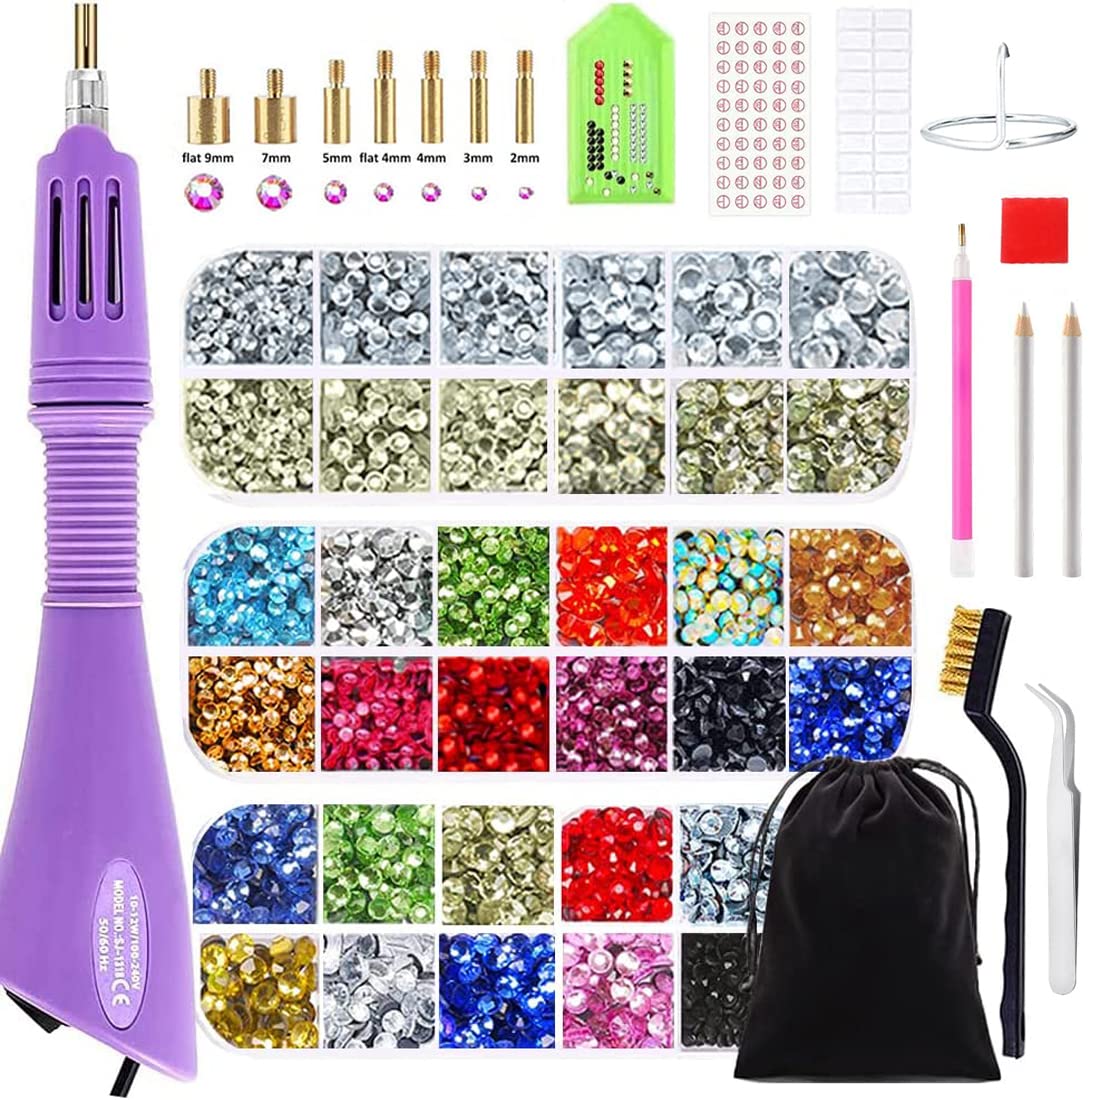 Rhinestone Applicator, Bedazzled Kit With Rhinestonesdiy Hotfix Applicator  Wand Setter, For Crafts Clothes Shoes, 7 Different Applicator Tips, Tweezer